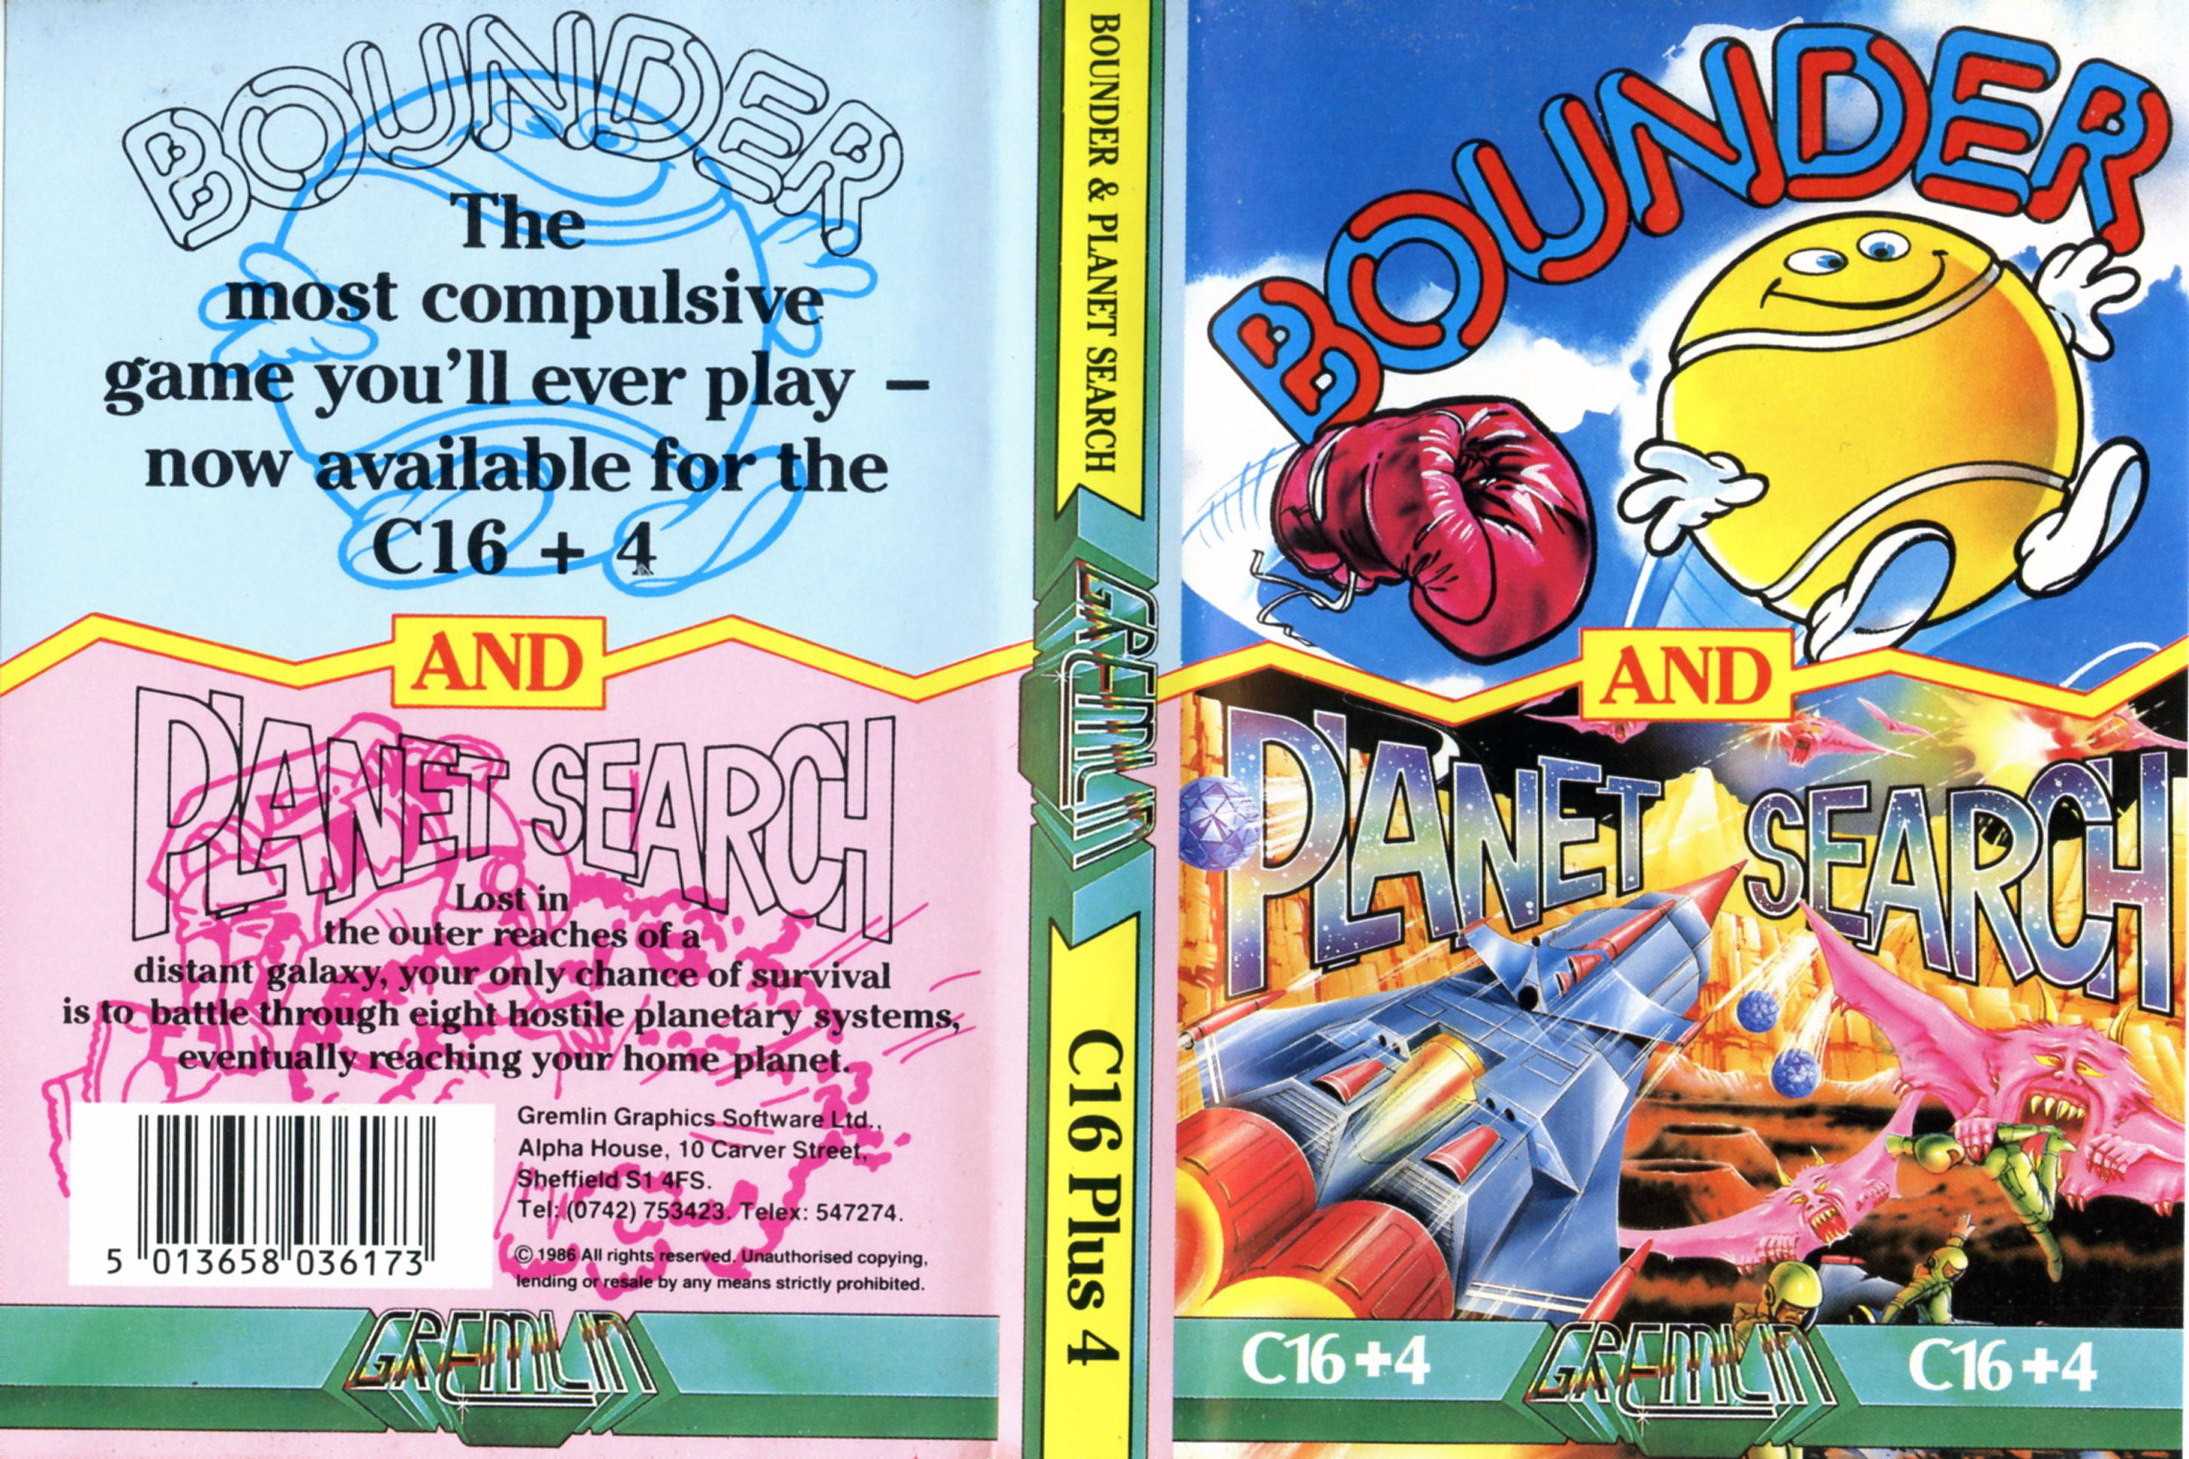 Bounder and Planet Search (Commodore C16/Plus 4)